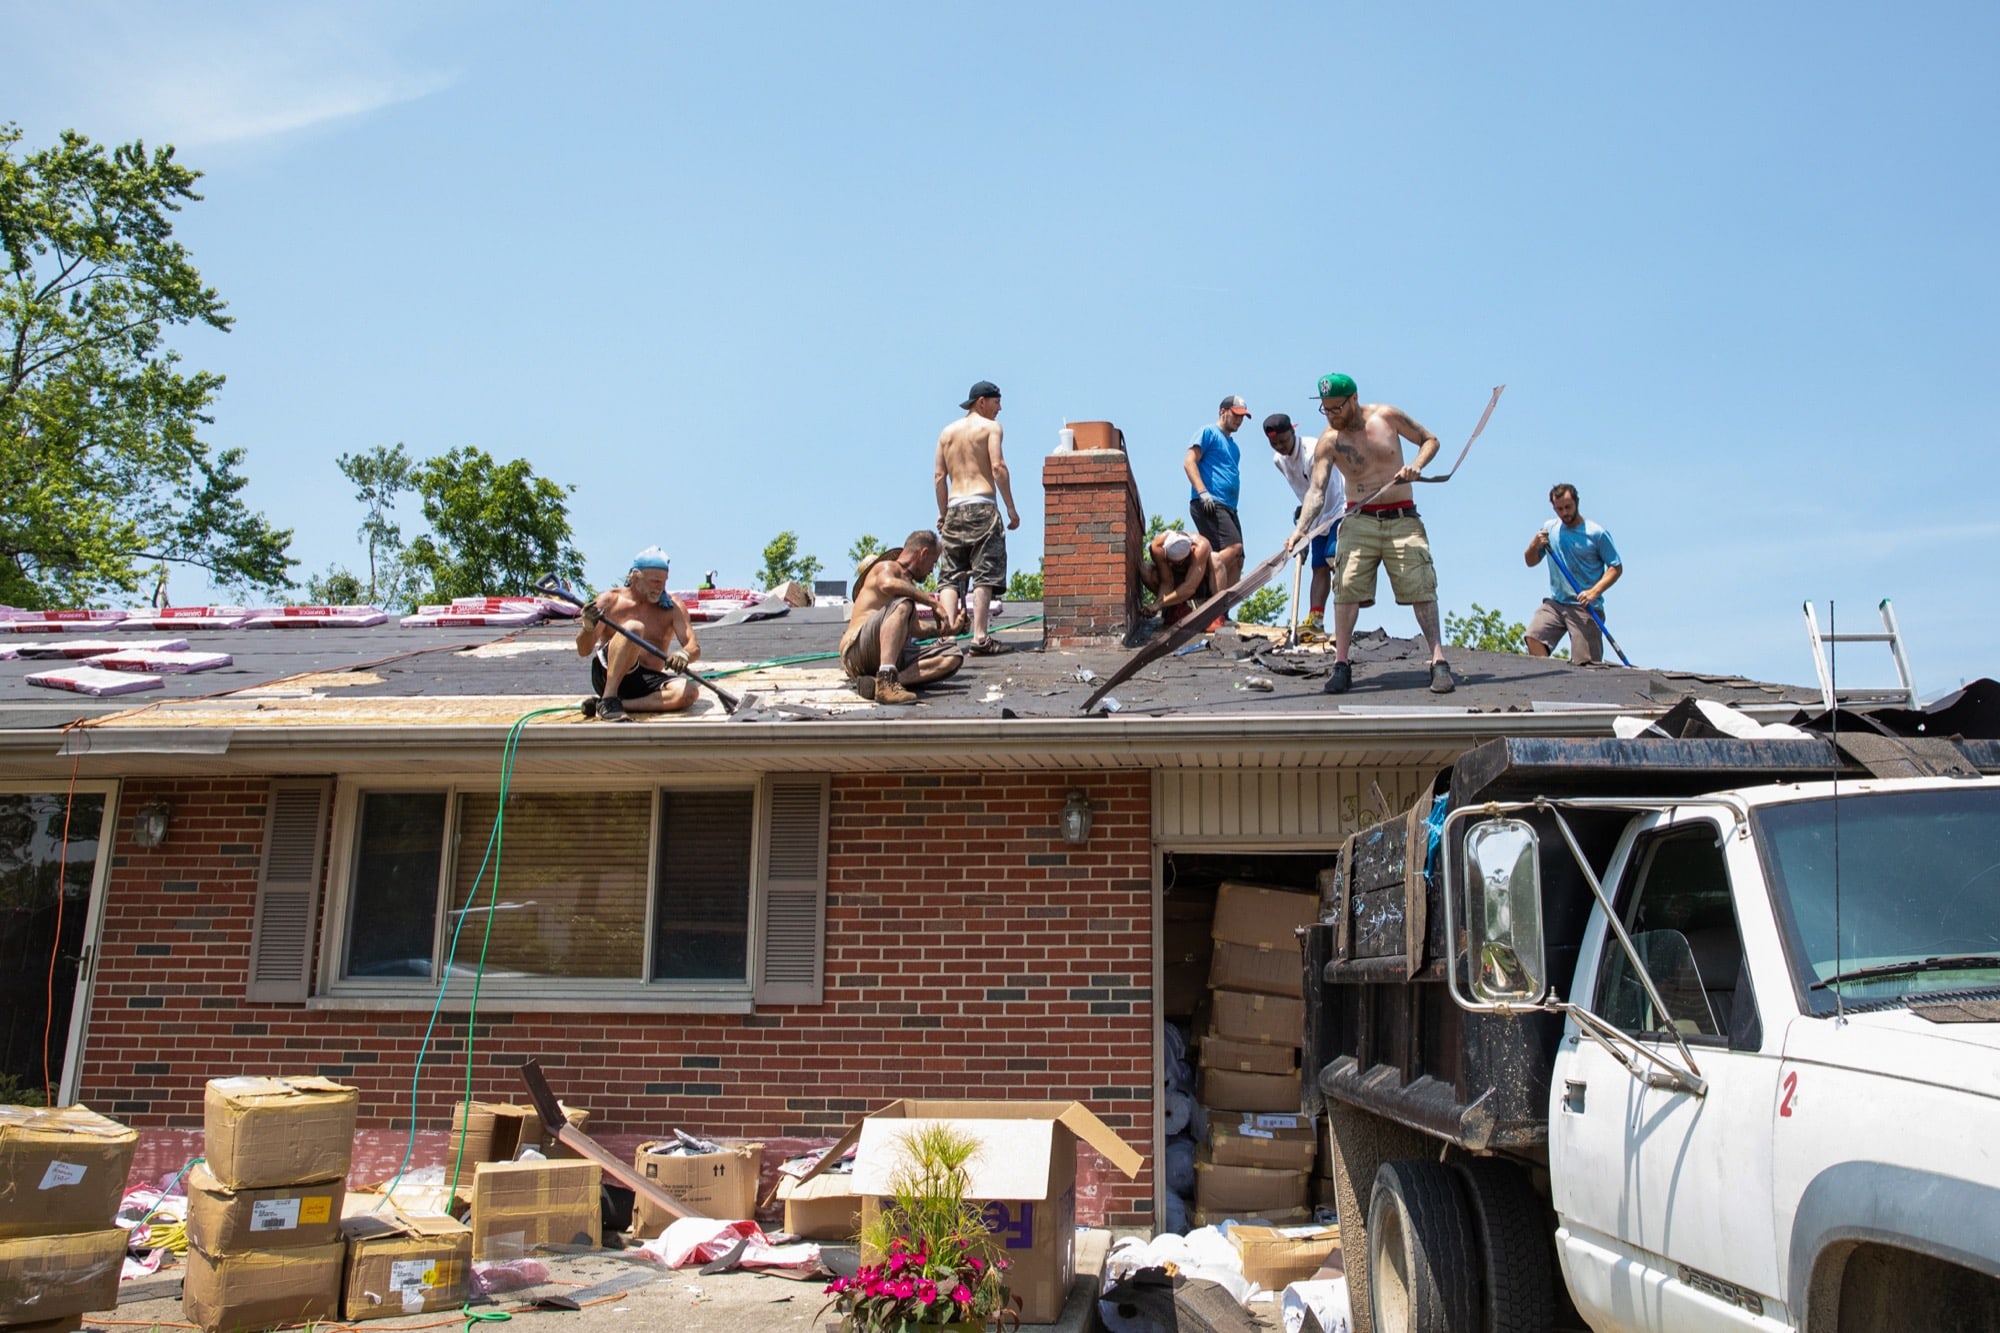 Contractors repair a roof in Beavercreek, Ohio, which was hit by an EF4 tornado in May. (Stacy Fernández/News21)